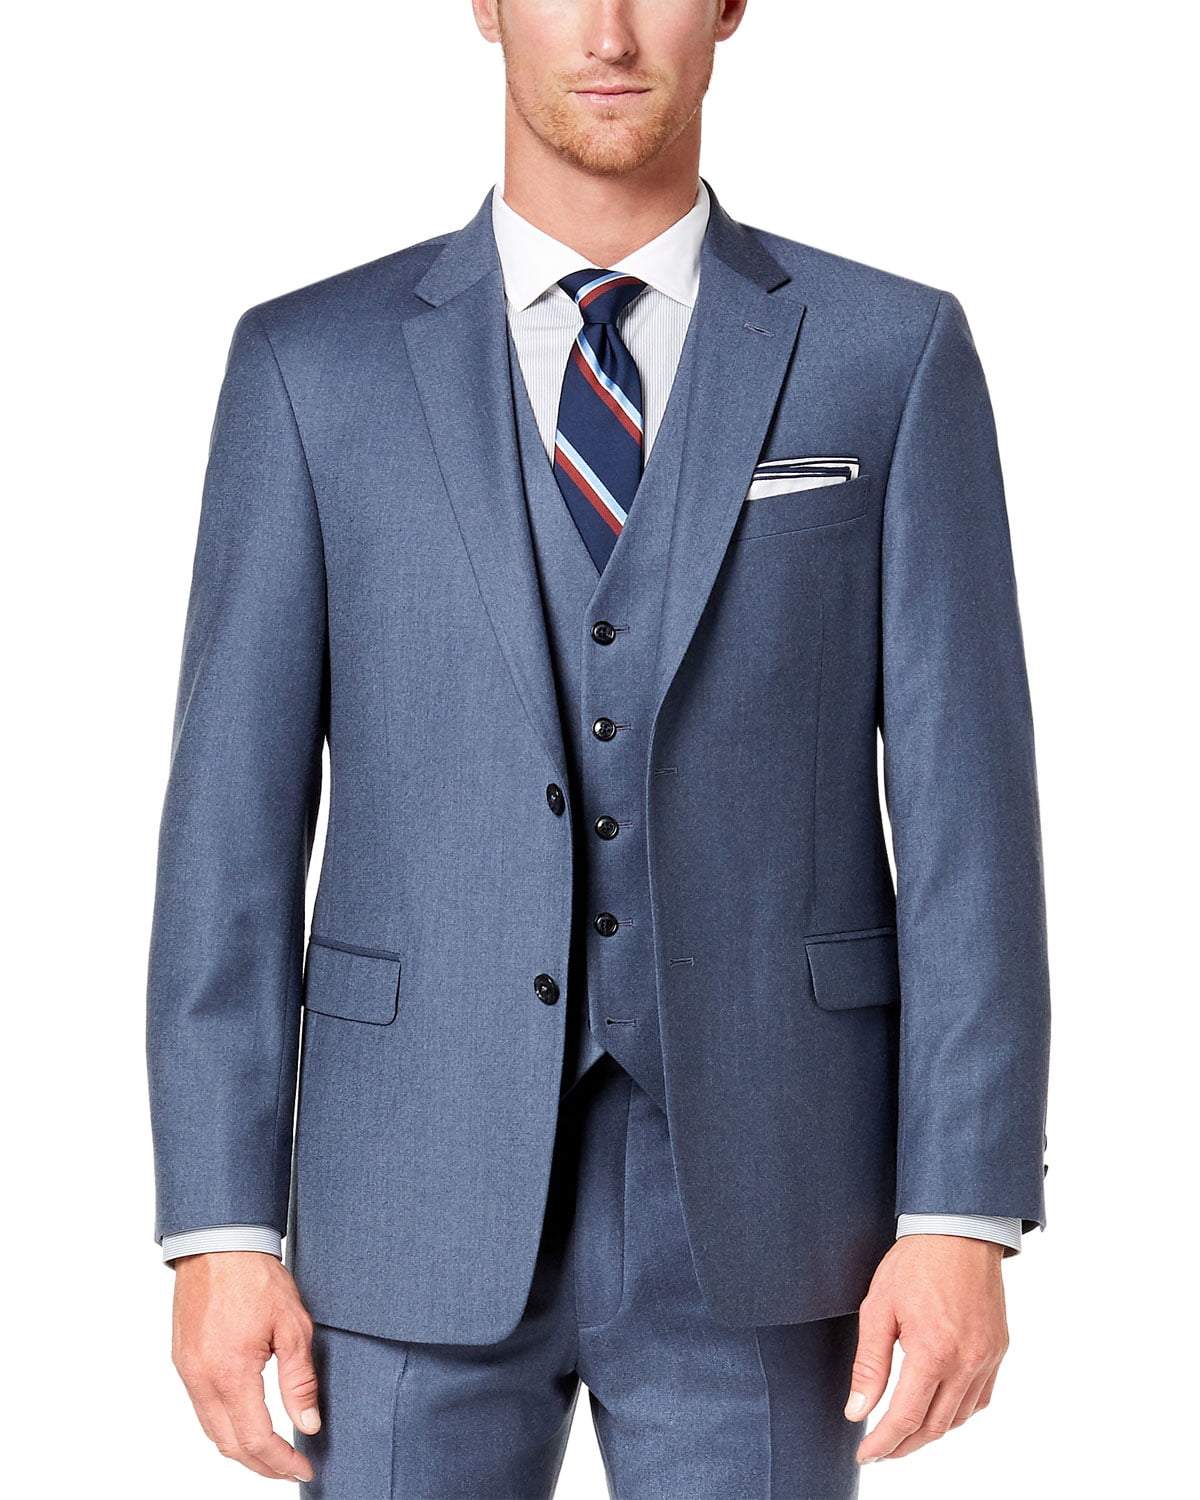 Tommy Hilfiger Mens Jacket Modern Fit Suit Separates with Stretch-Custom Jacket & Pant Size Selection 42L New Navy Sharkskin